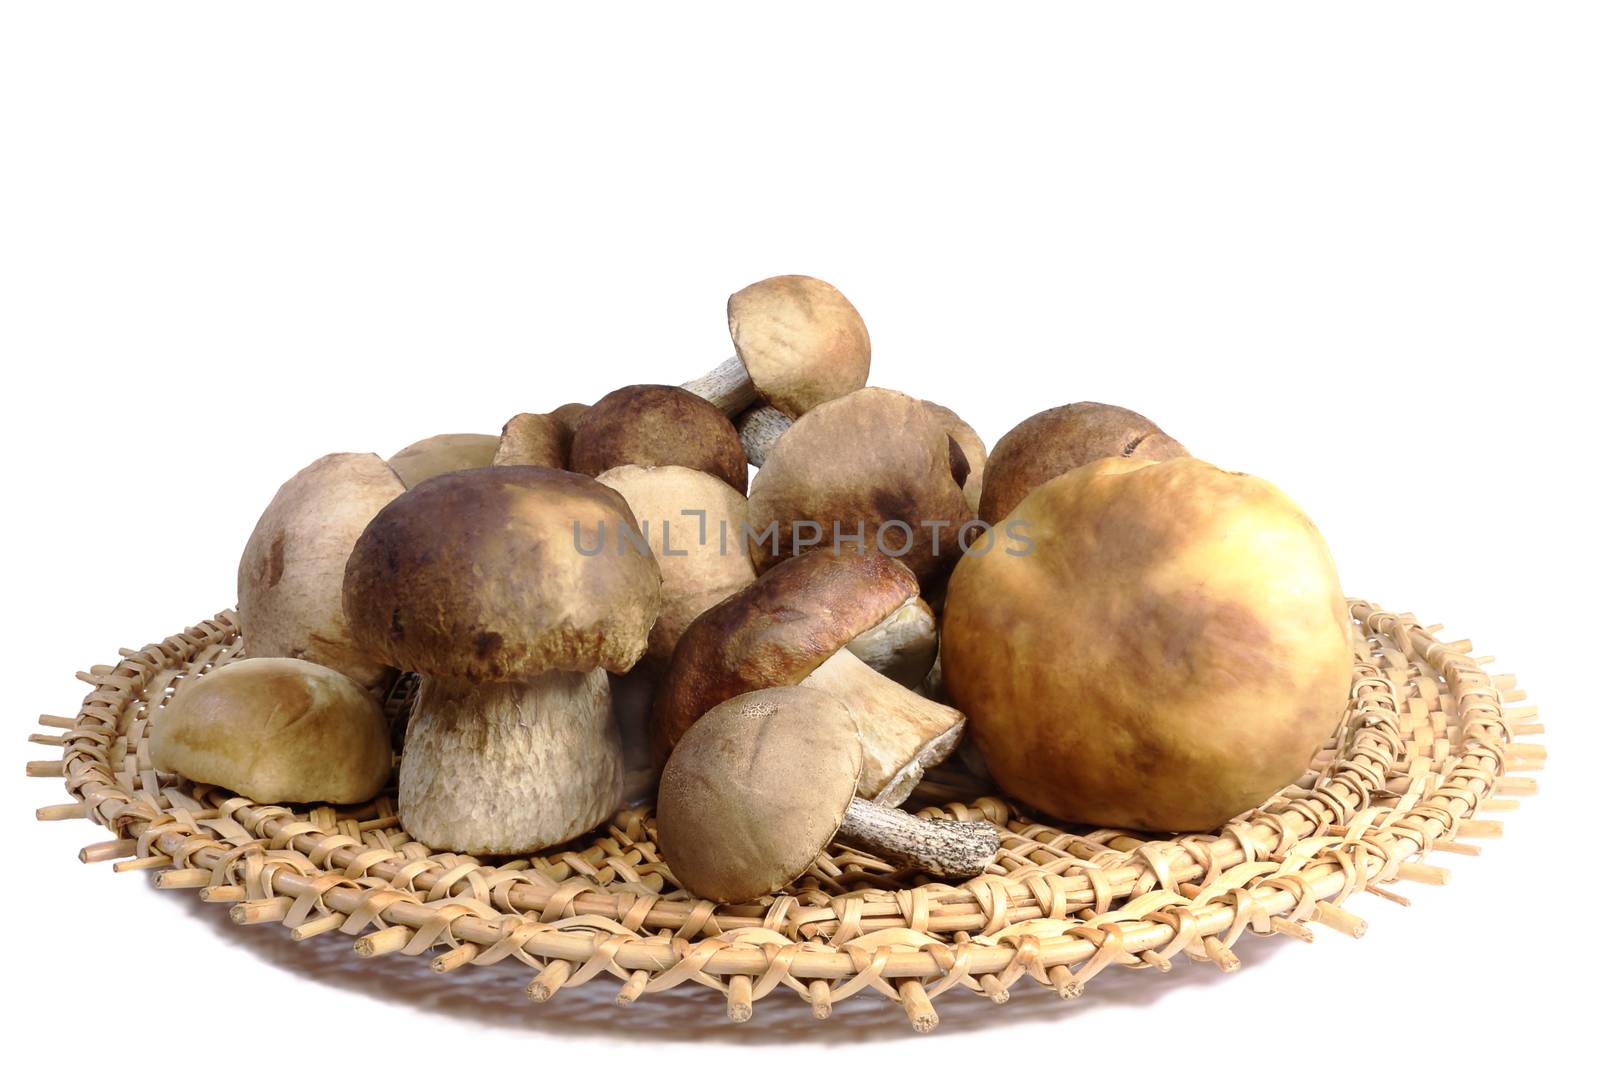 Mushrooms in a wicker dish on a white background. by georgina198